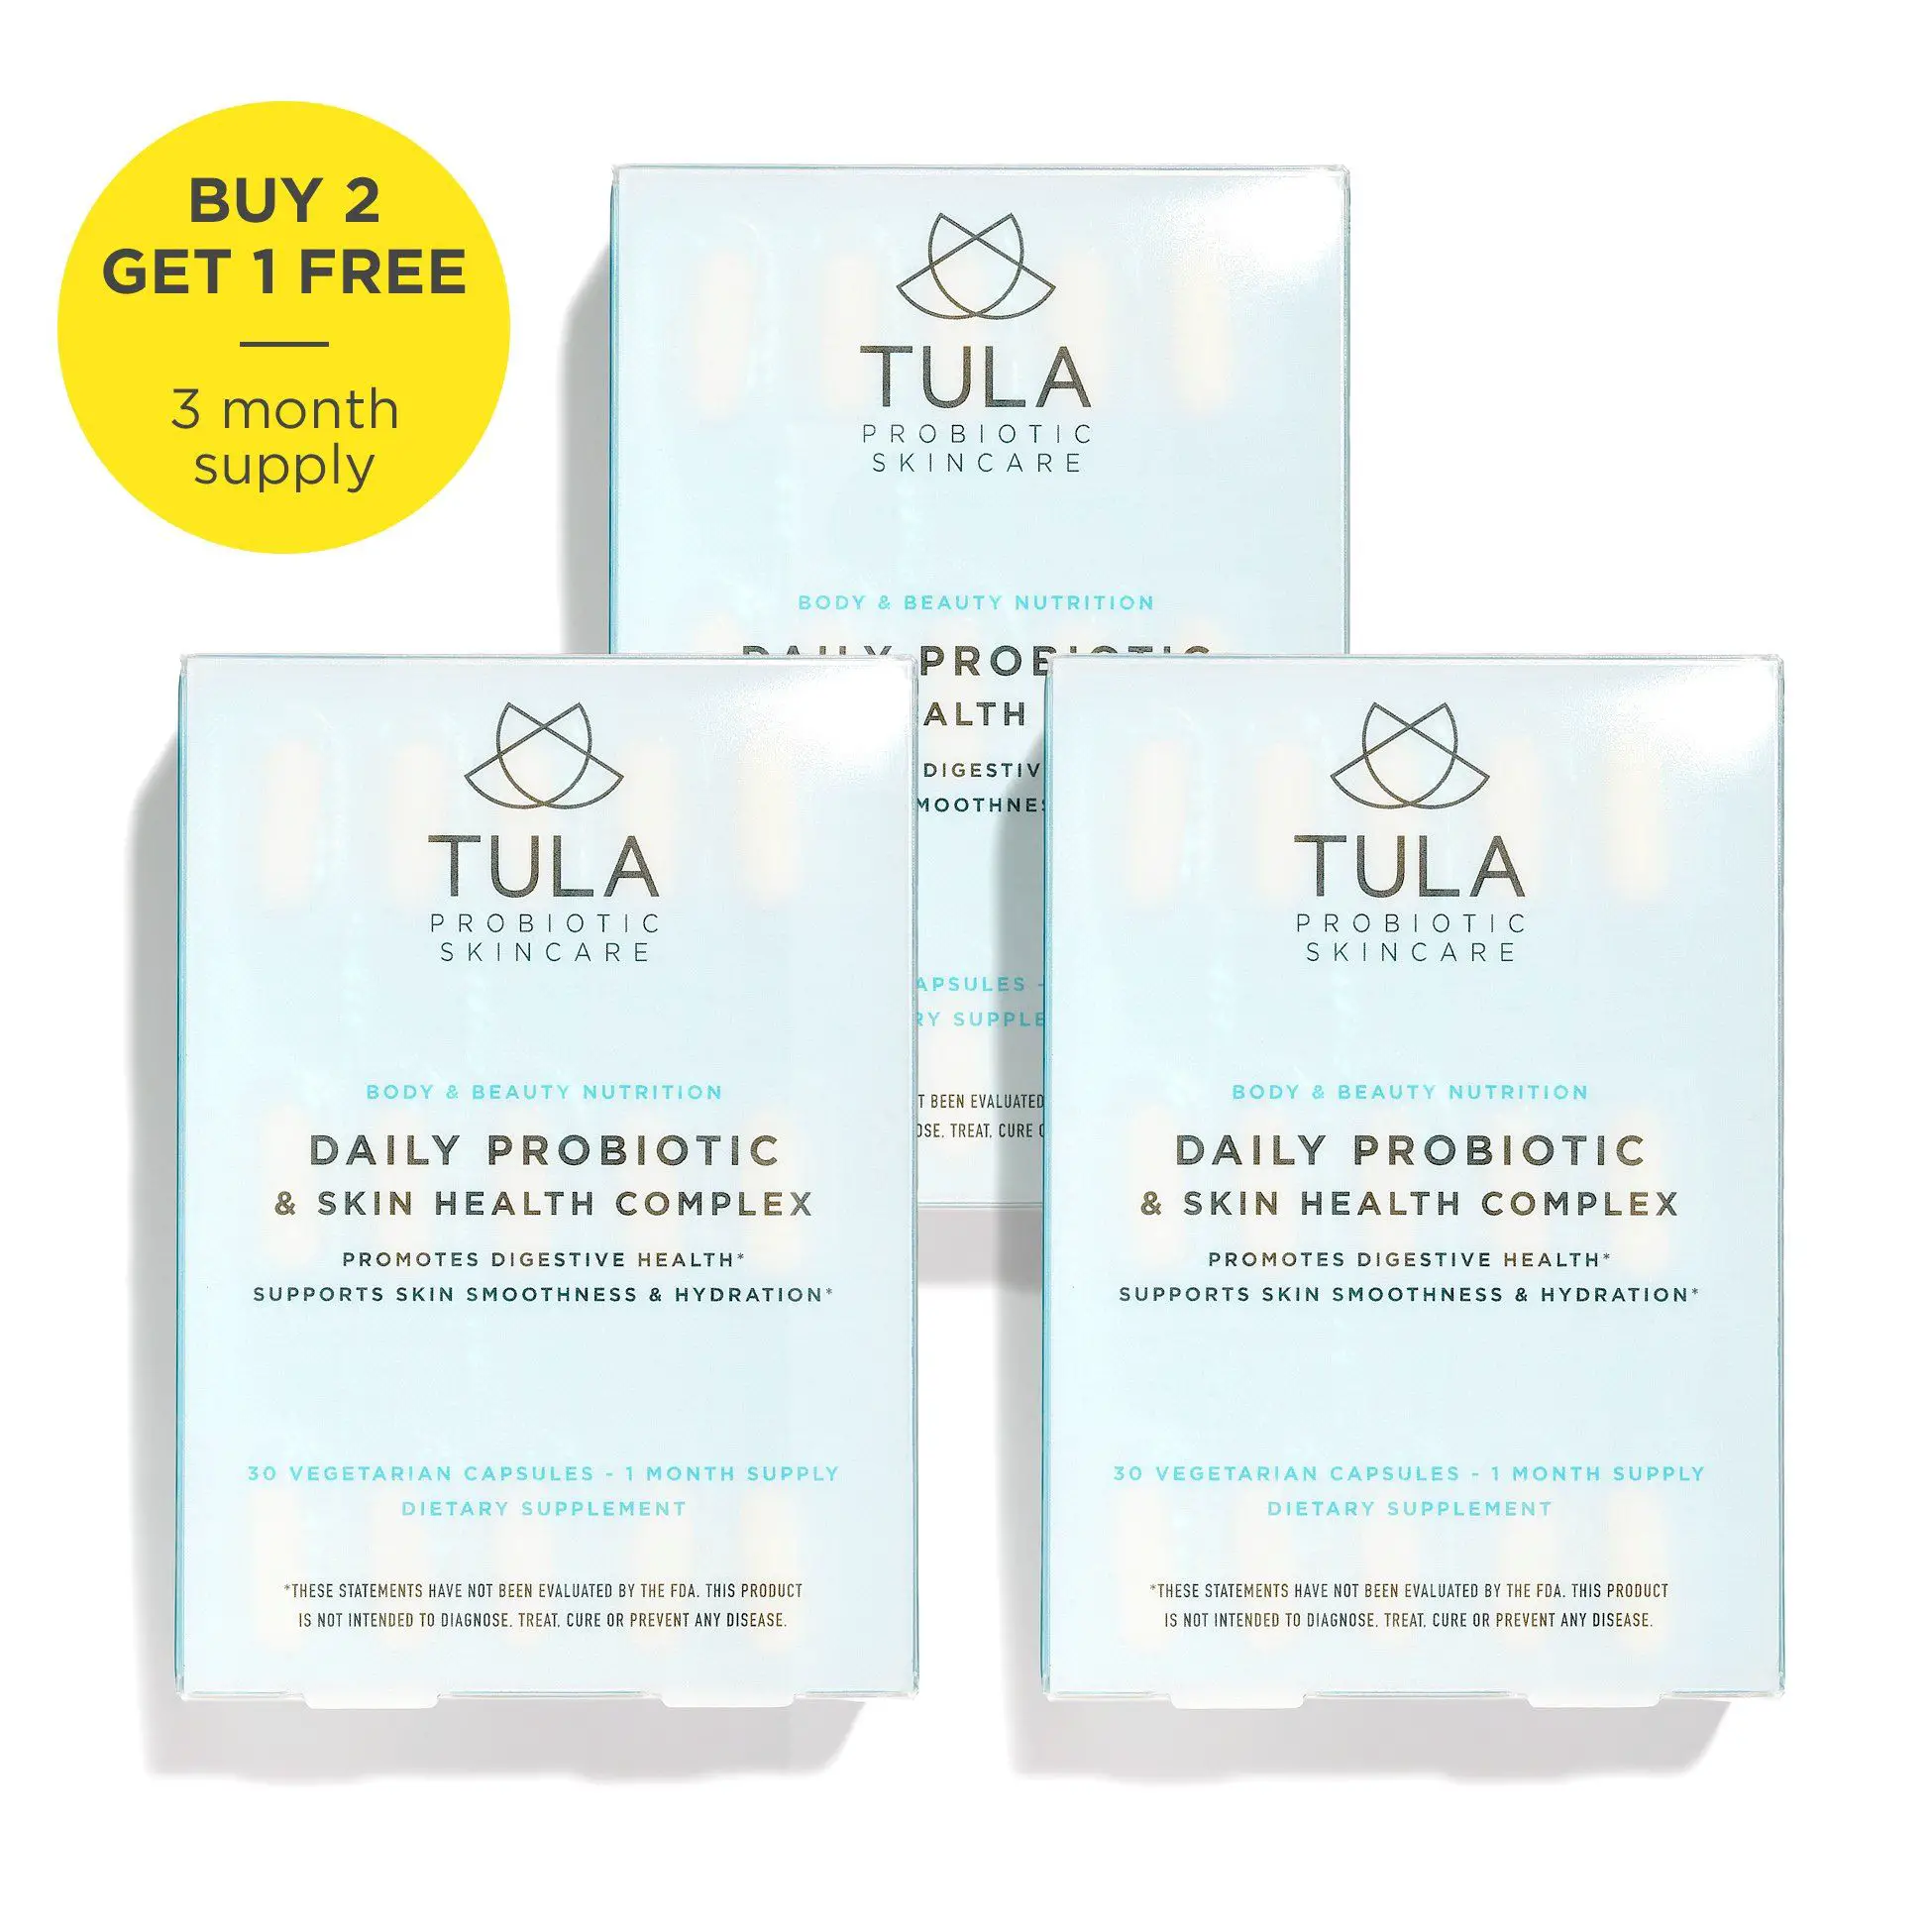 TULA Skin Care Daily Probiotic and Skin Health Complex Probiotic ...